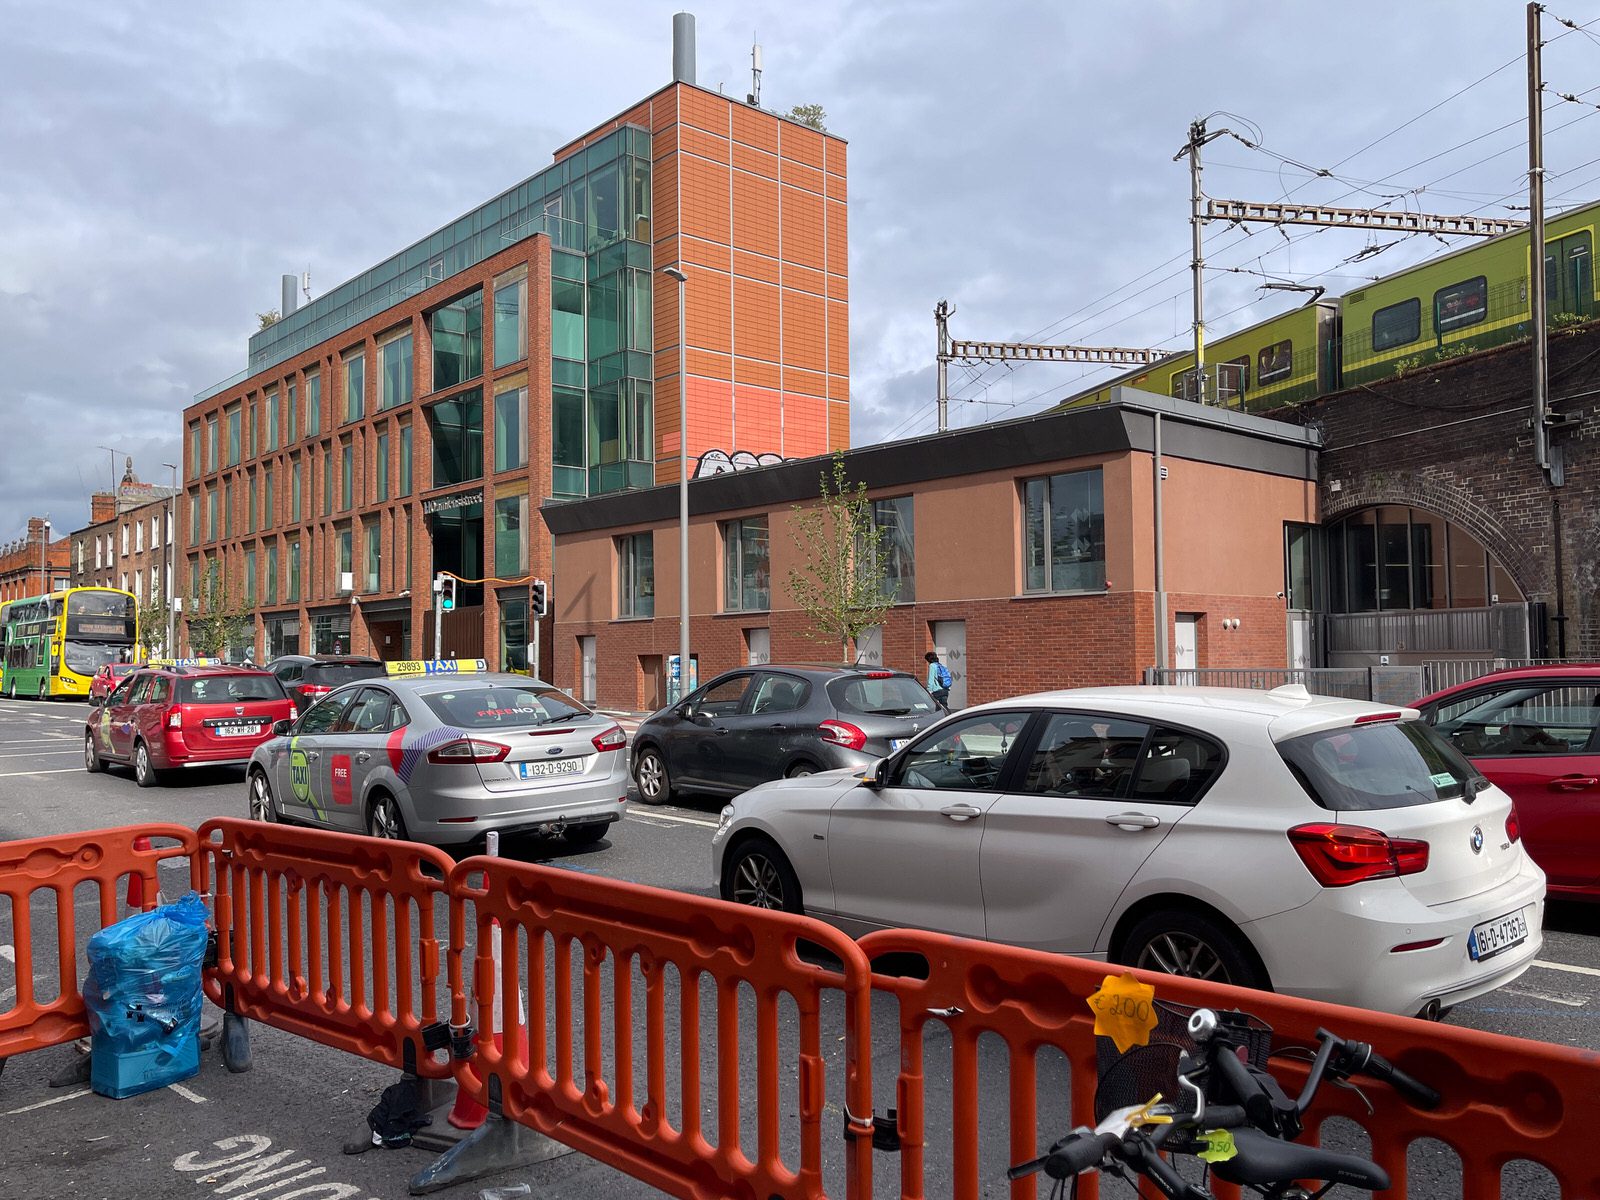 THE CLONTARF TO CITY CENTRE CYCLE AND BUS PRIORITY PROJECT [AMIENS STREET SECTION STILL A WORK IN PROGRESS] 012